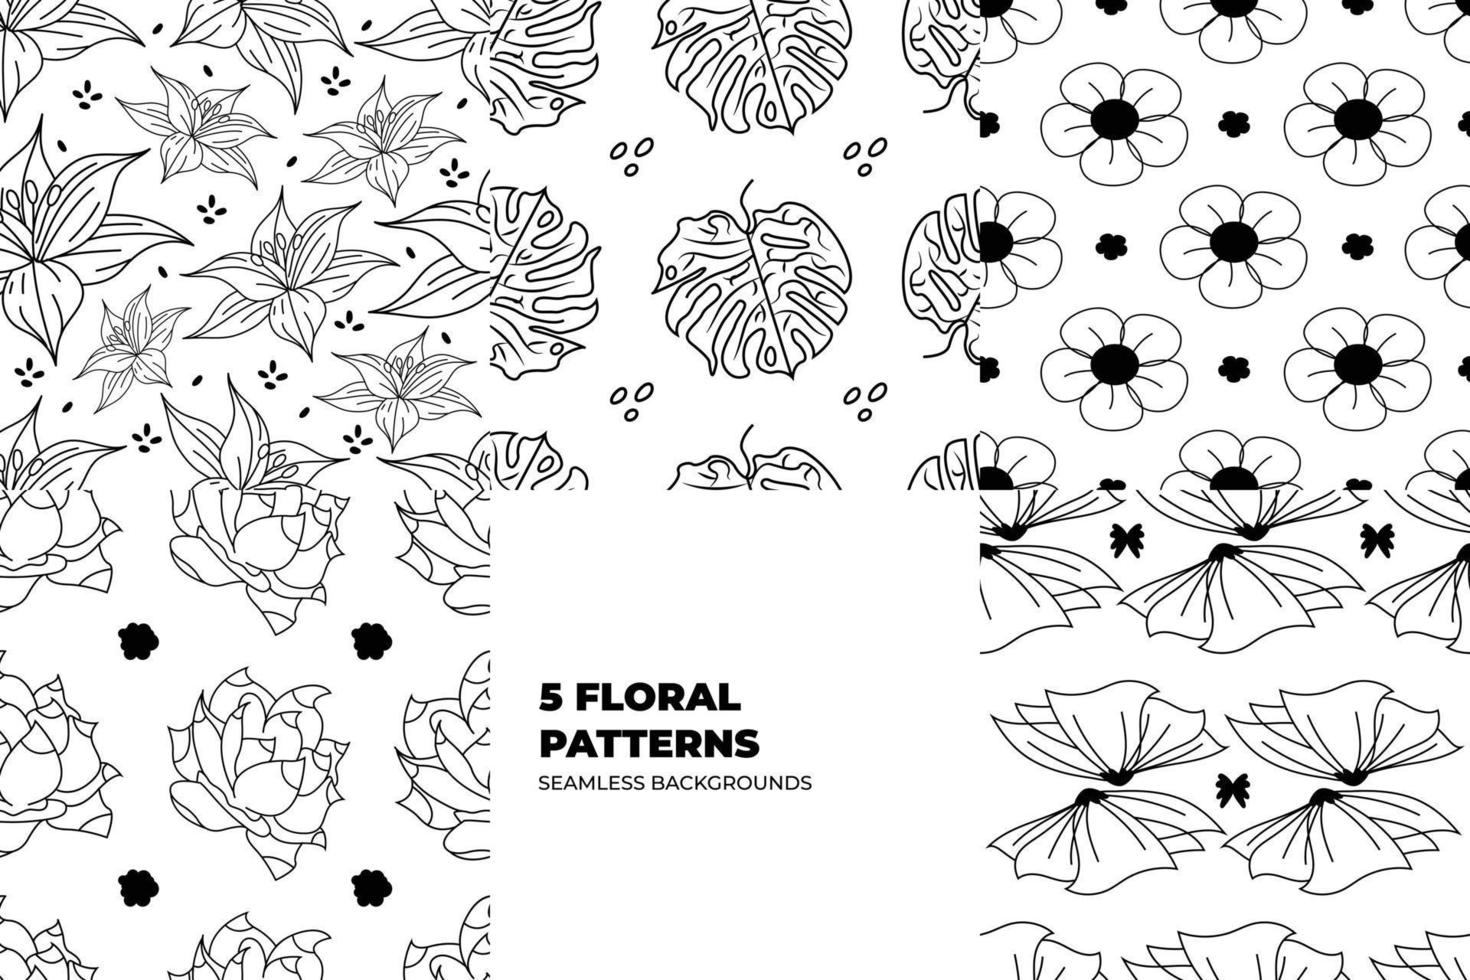 Vintage style blooming flowers and leaves background set. Floral seamless patterns for fabric, fashion and wallpapers. Artistic doodles on the colorful backdrops. Scandinavian vector style.